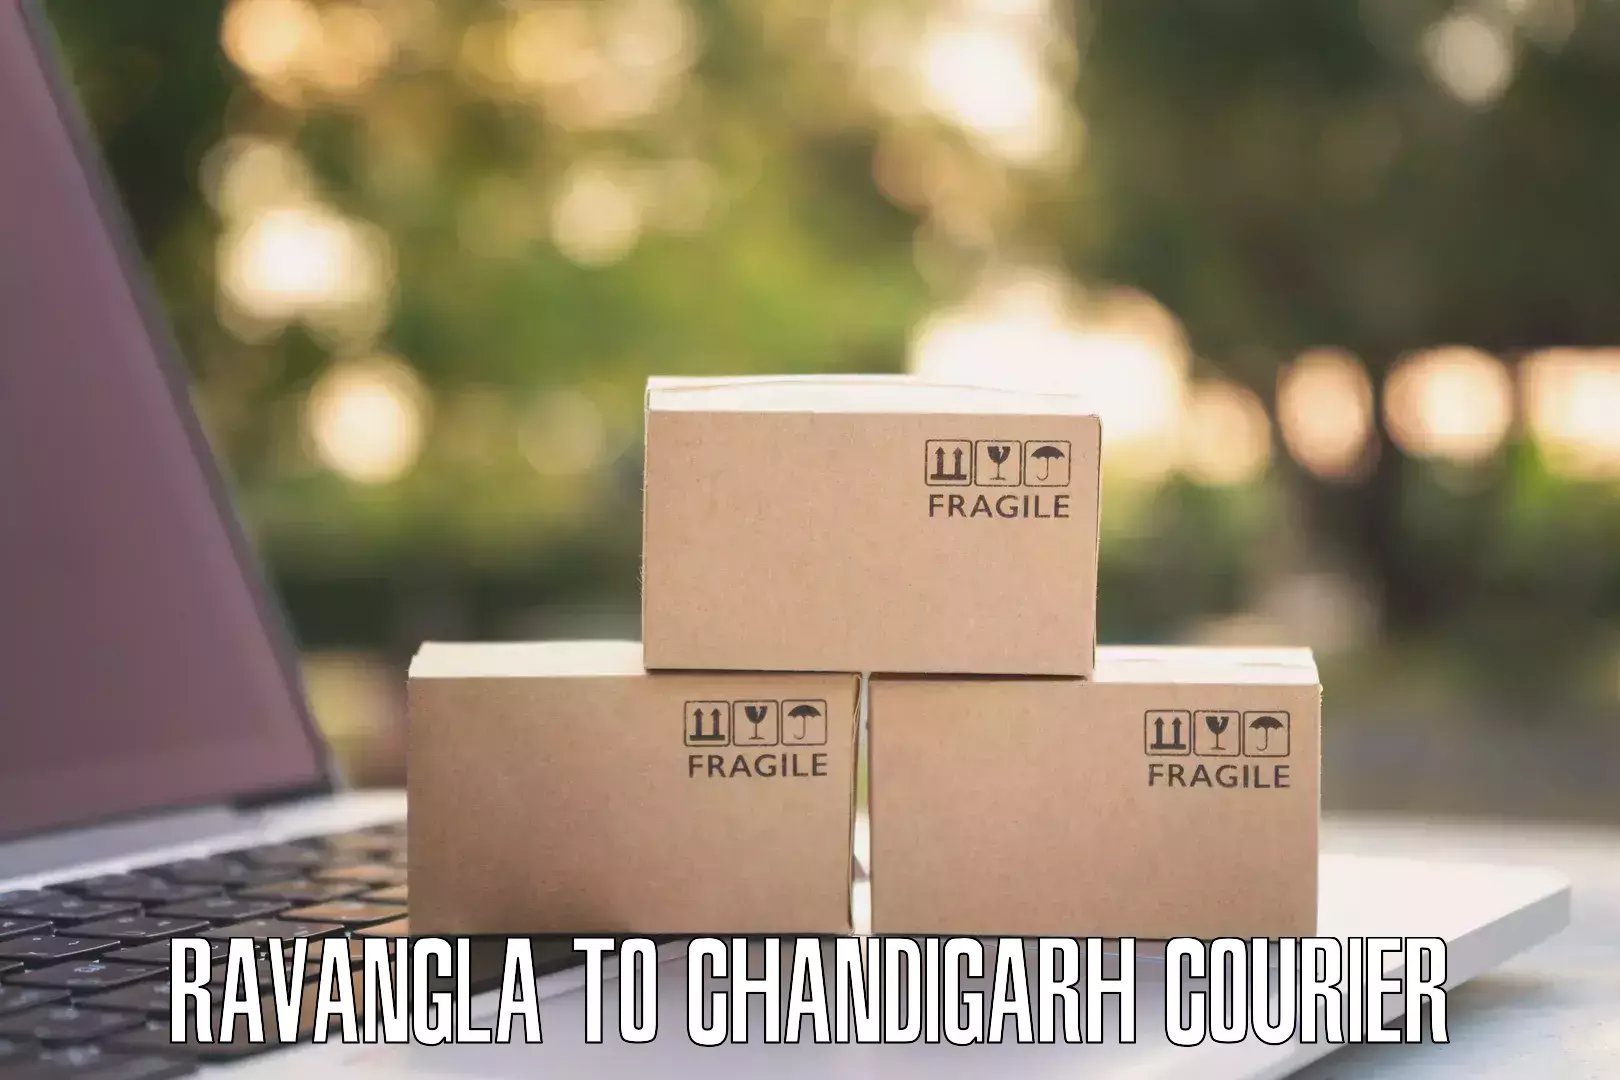 Easy access courier services Ravangla to Chandigarh